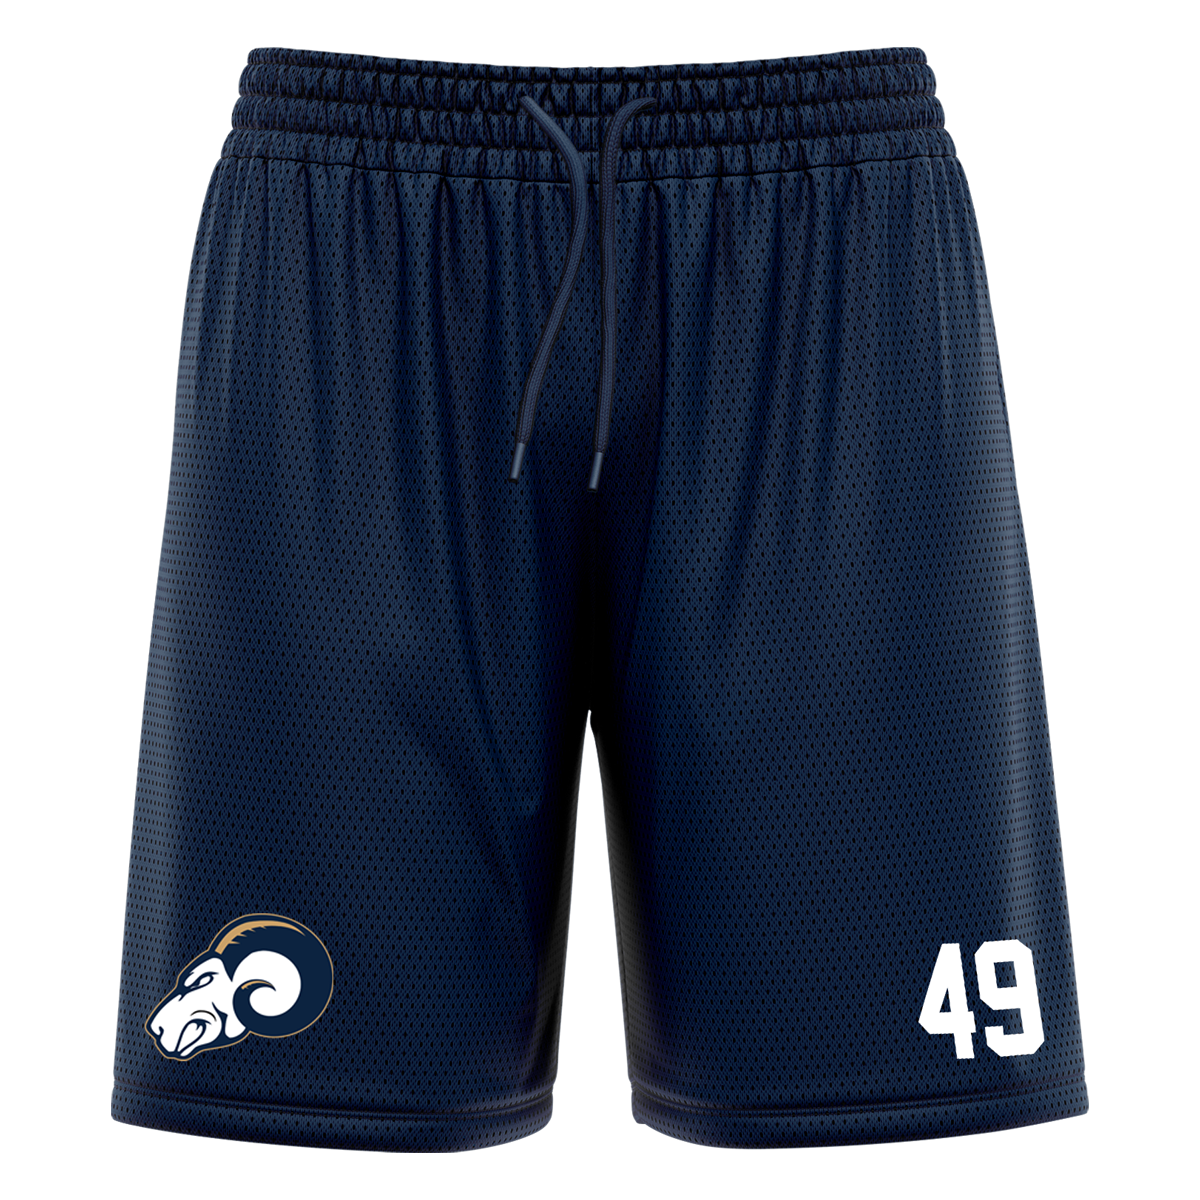 Rams Athletic Mesh-Short with Playernumber/Initials